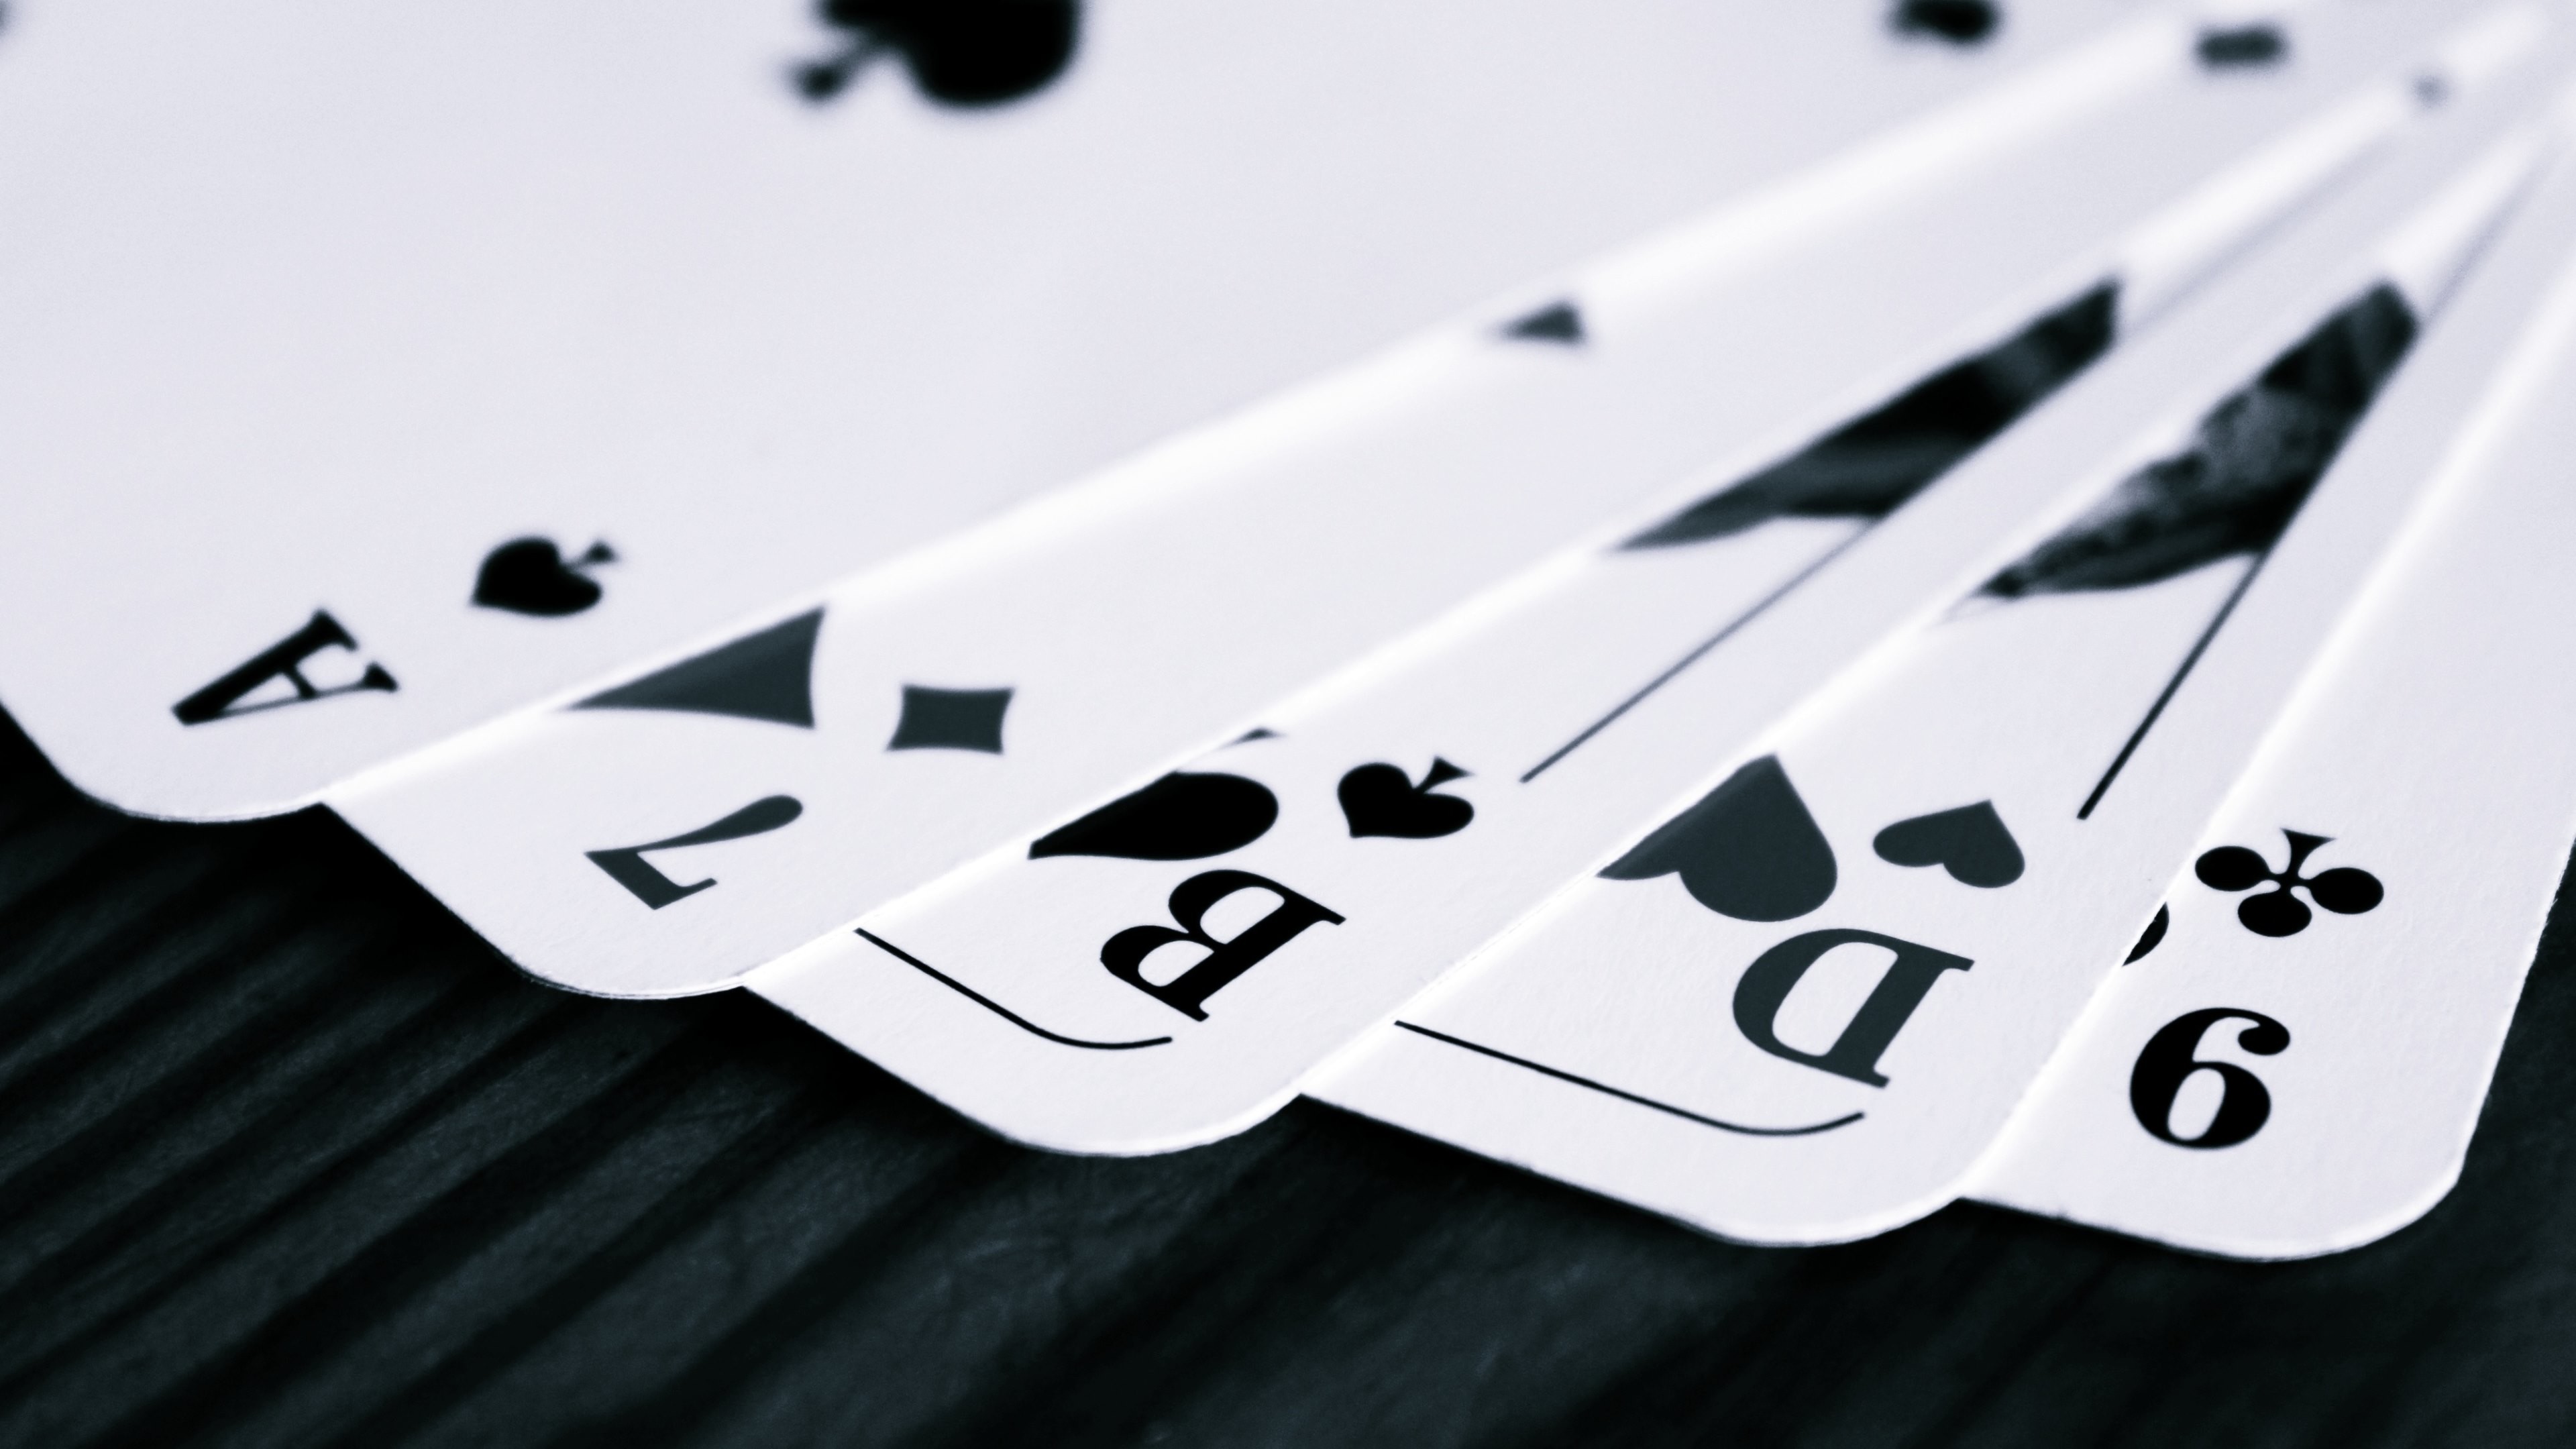 3840x2160 Wallpaper: Game Cards in Black and White. Ultra HD 4K 